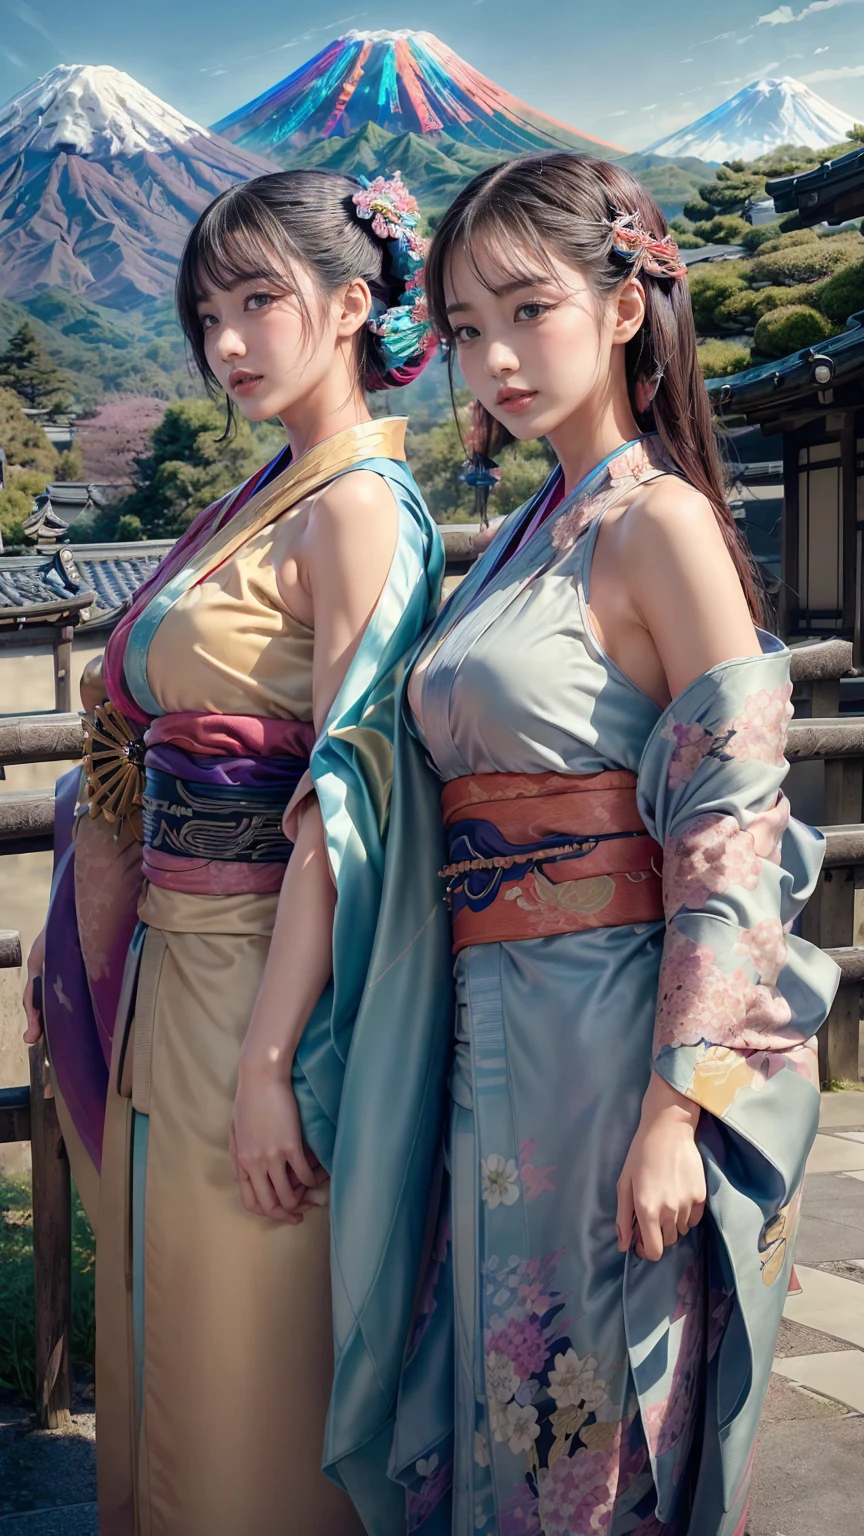 Highest quality, masterpiece, High resolution, 8K, (Realistically：1.4), 超High resolution, One girl, Super detailed, Ultra-realistic, Highly detailed CG illustrations, Official Art, Cinematic light, Realistic, Young and beautiful girl, Full POV, best quality, masterpiece, New Year, 

(Kimono with strikingly beautiful colors:1.7), 

Three Japanese high-school cute girls, looking straight, 

gently smiling, white short scarf, white feather shawl, 

(separately side by side:1.4), 

(The image shows only the upper body:1.7),

 shrine background, (mount Fuji:1.3),winter(season),(outdoors:1.5)